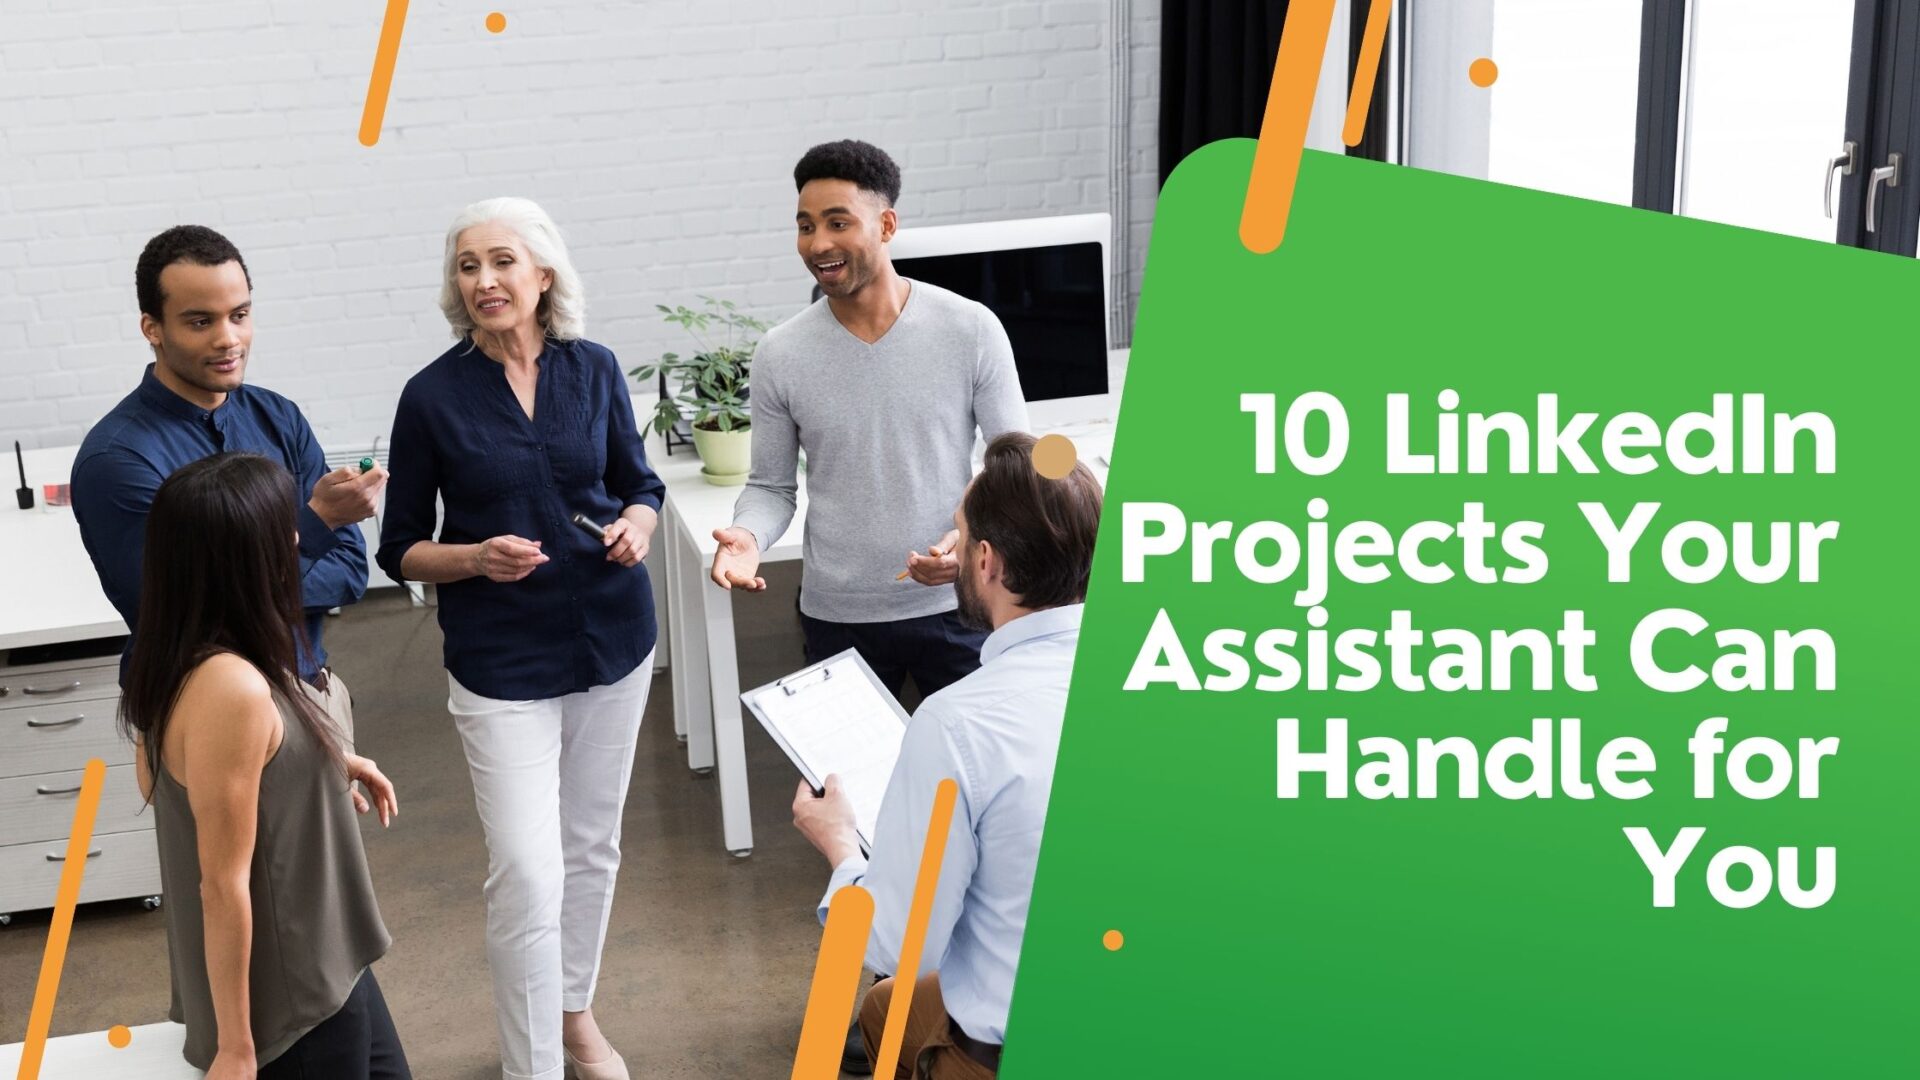 10 LinkedIn projects your assistant can handle for you